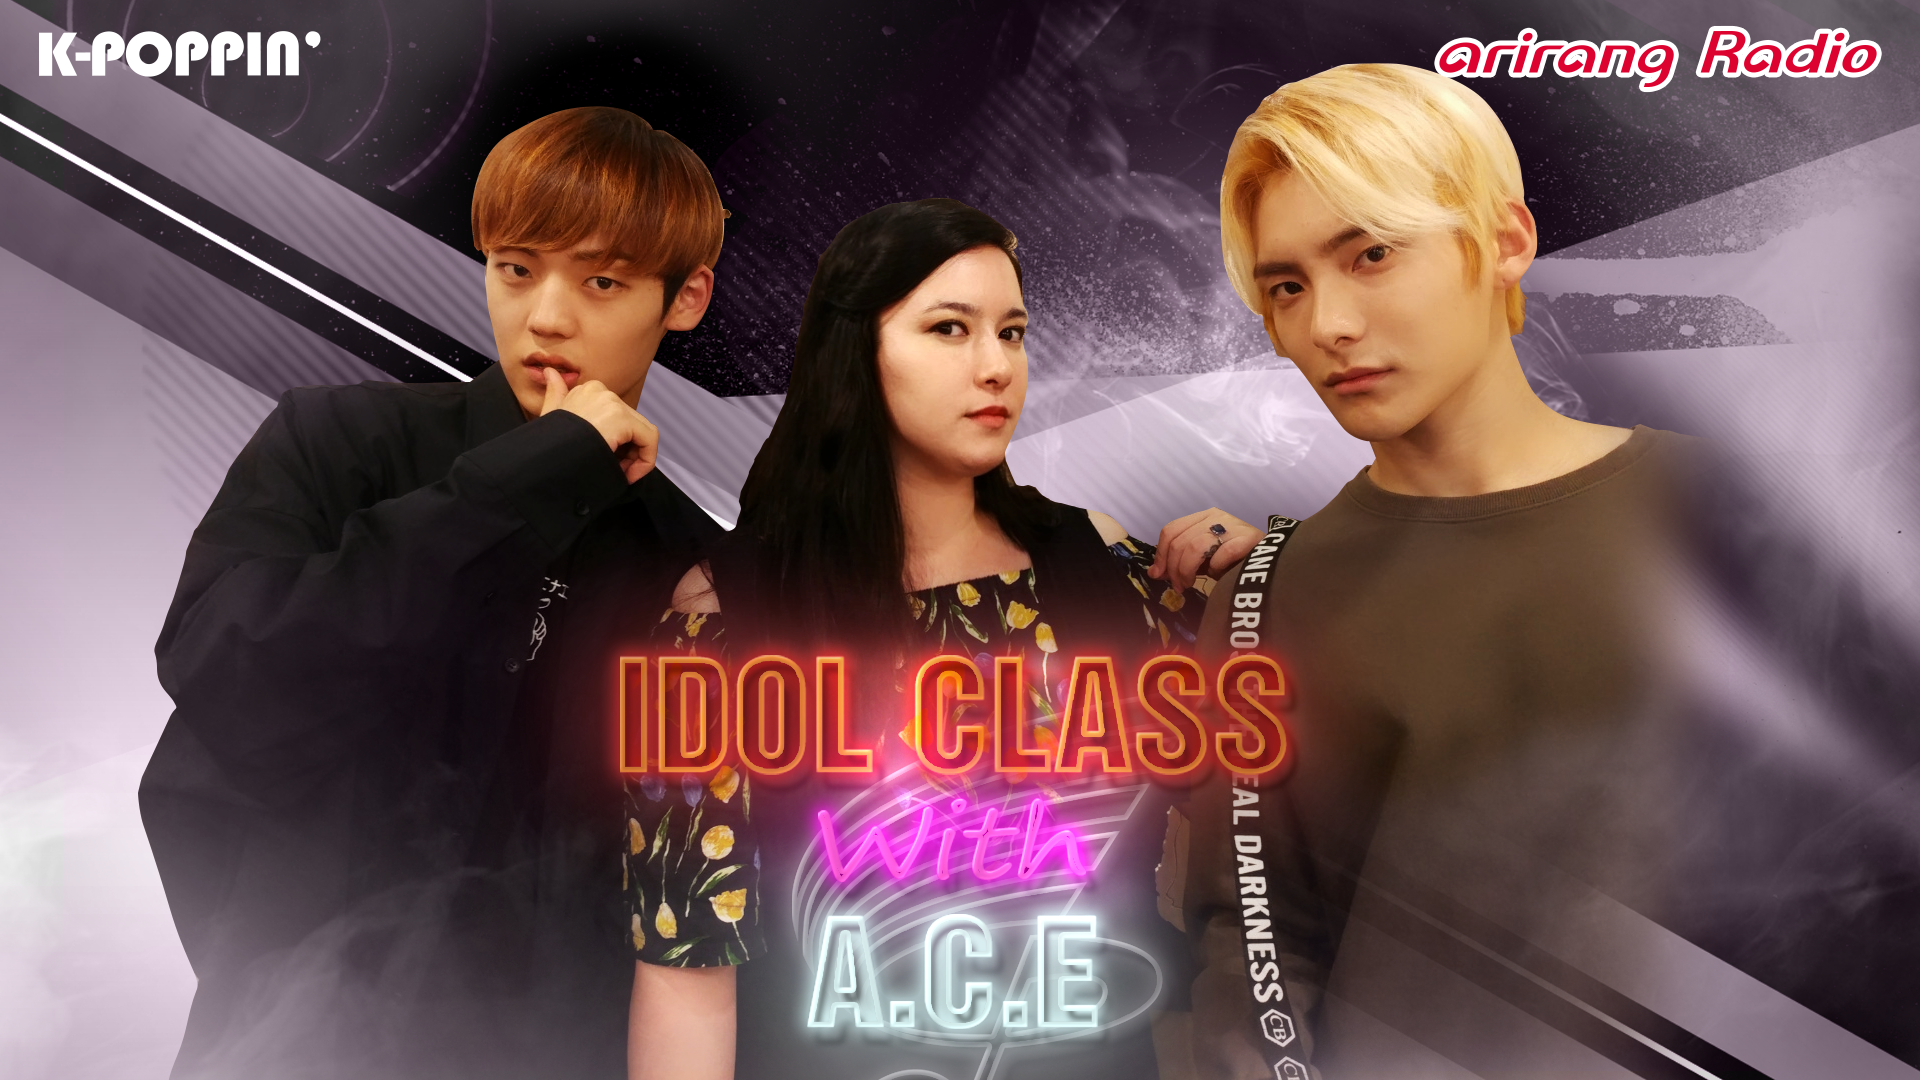 IDOL CLASS with A.C.E